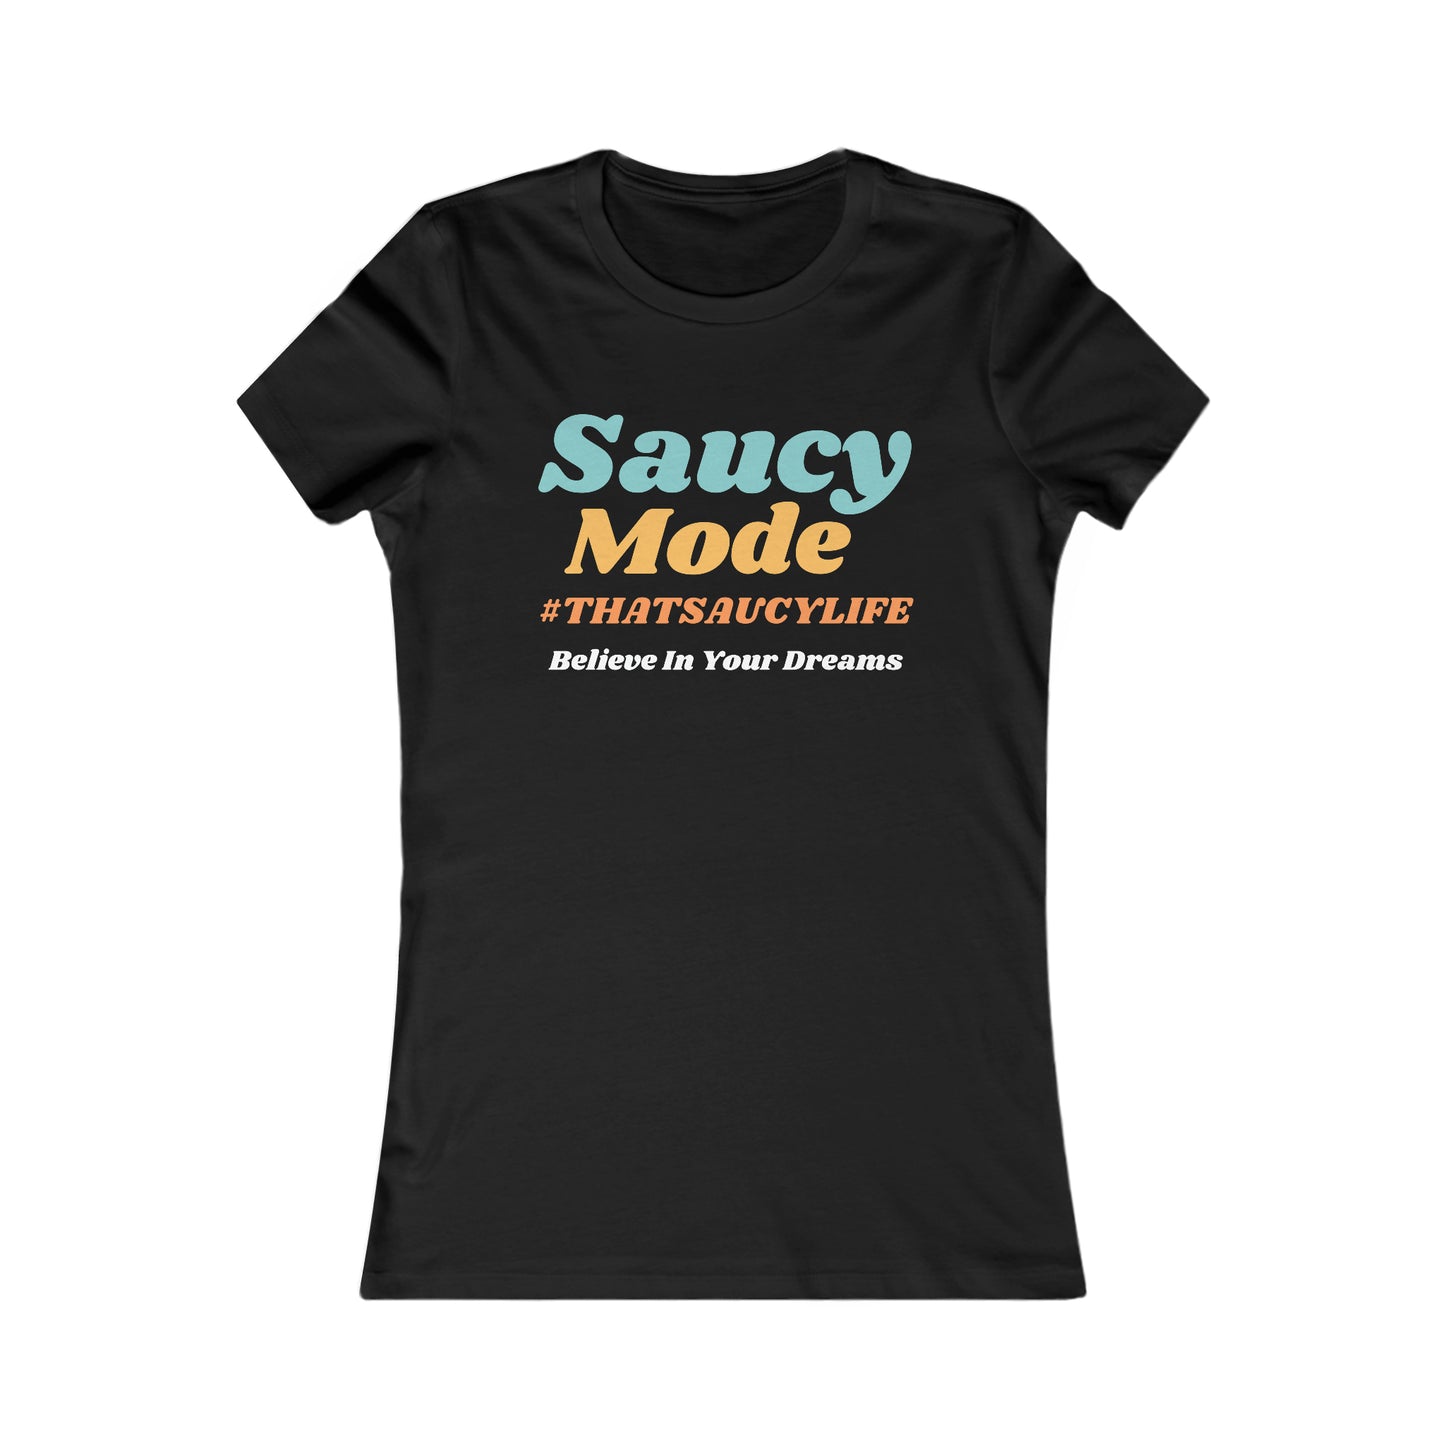 Saucy Mode #THATSAUCYLIFE Believe In Your Dreams T-Shirt Moreart